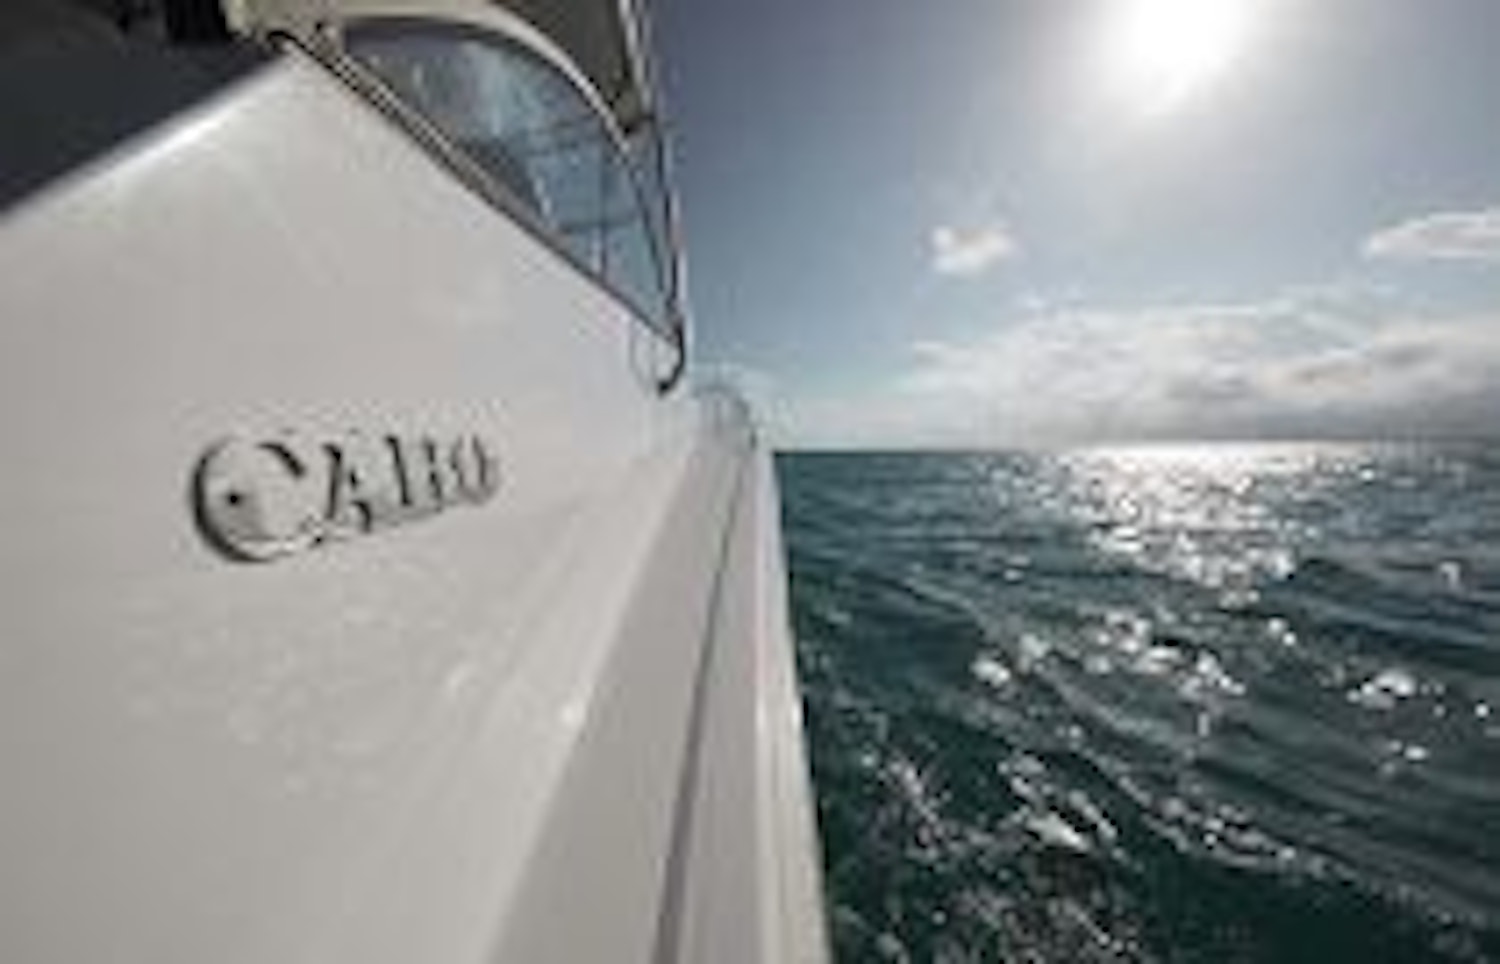 photo of Cabo Yachts logo on the 41